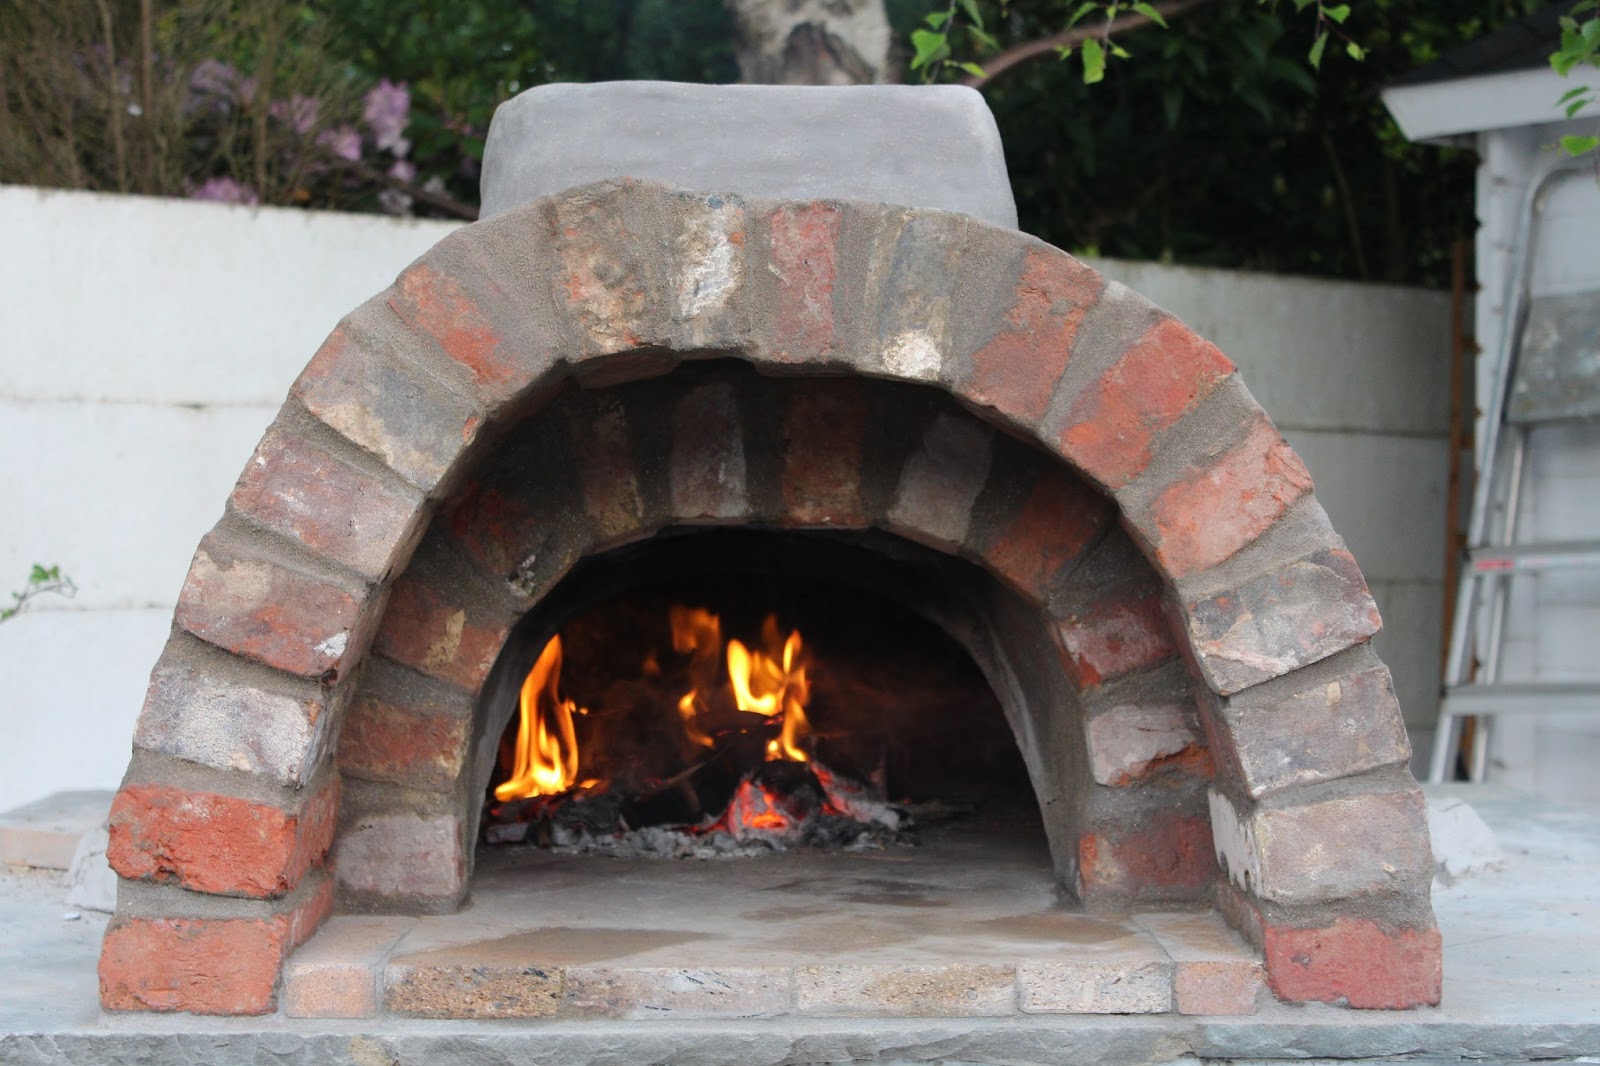 FLOWER POT KITCHEN: CLAY OVEN BUILDING YOUR WOOD FIRED PIZZA OVEN